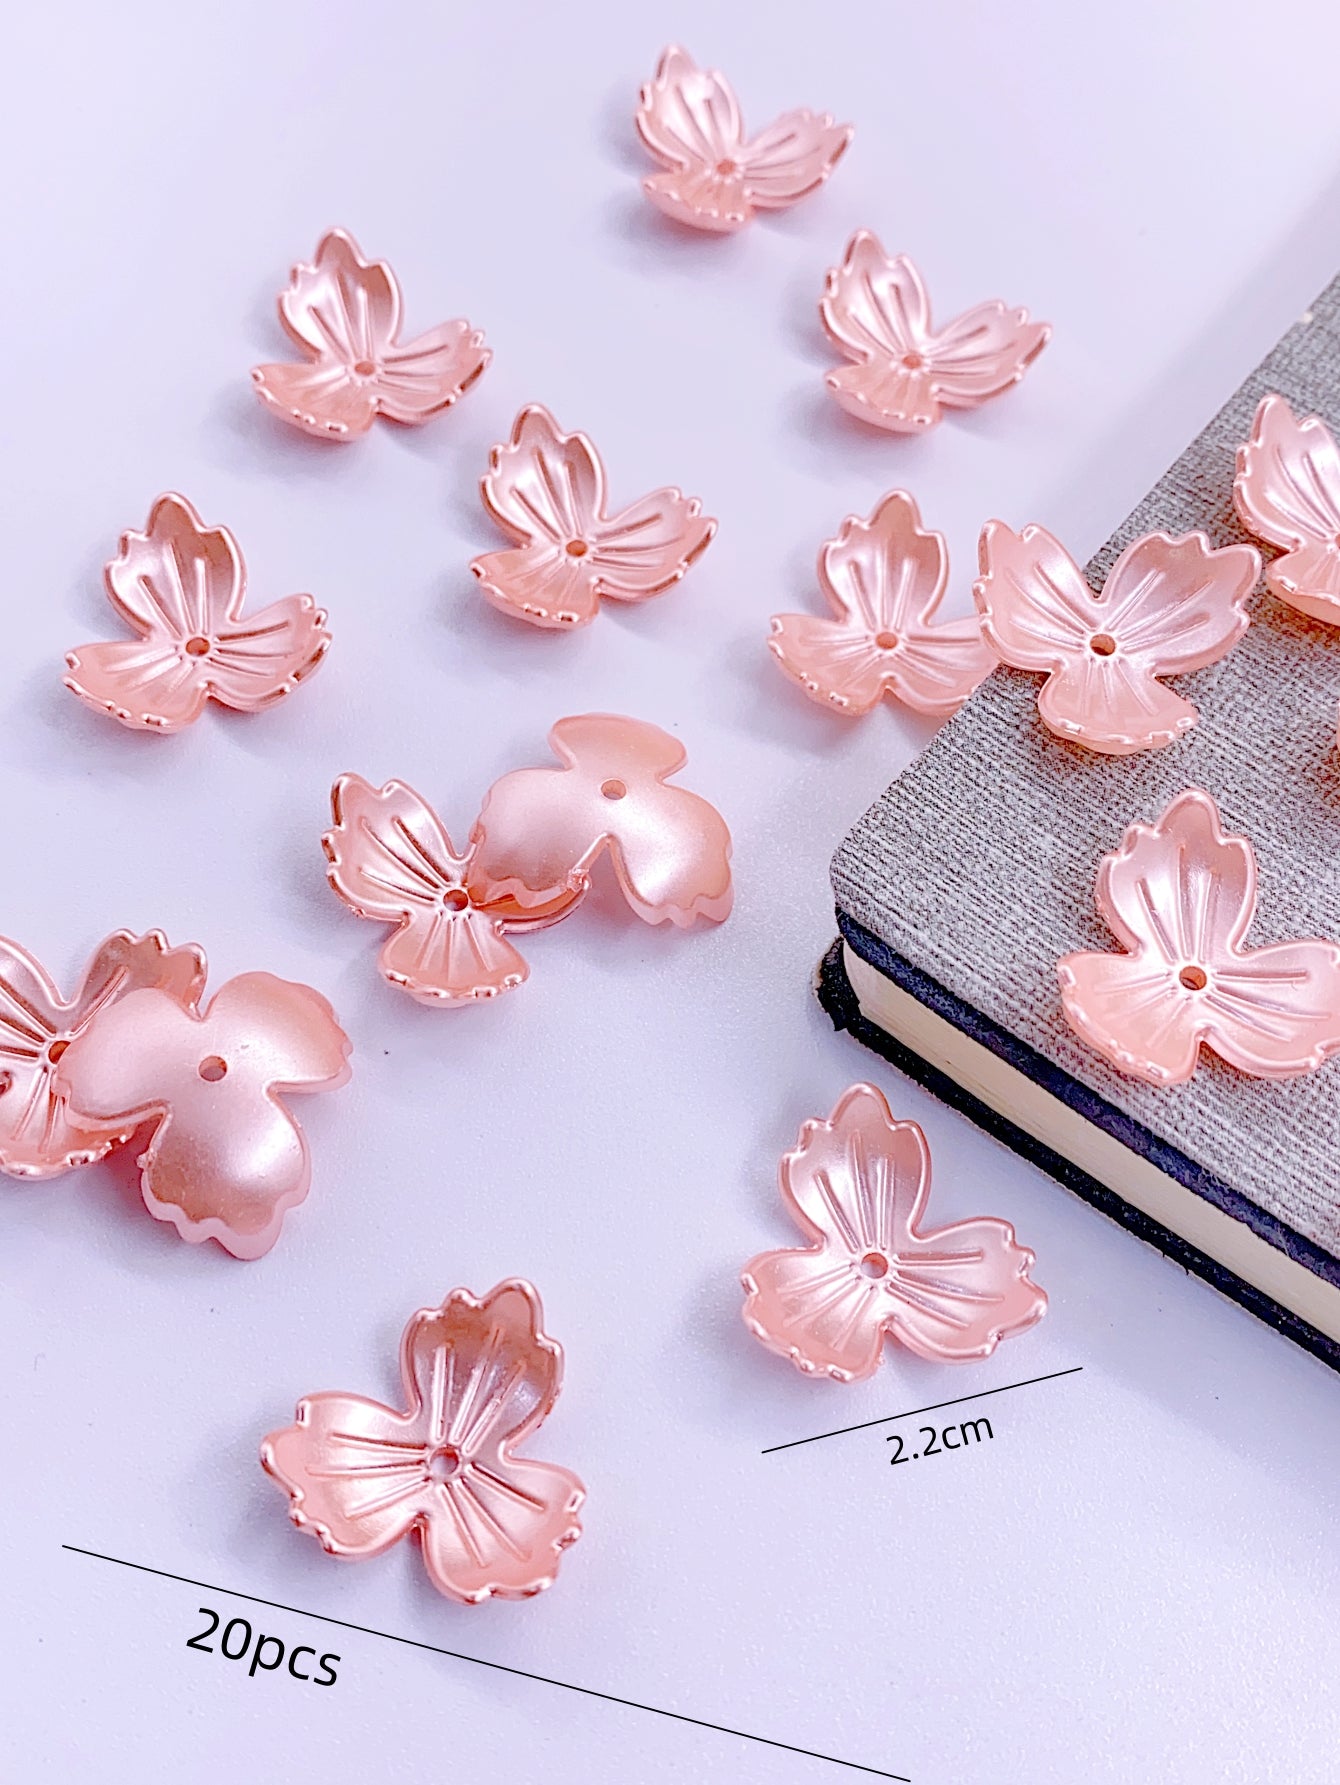 New abs seven-color imitation pearl three-leaf flower jewelry accessories diy simulation flower petals straight hole pearl